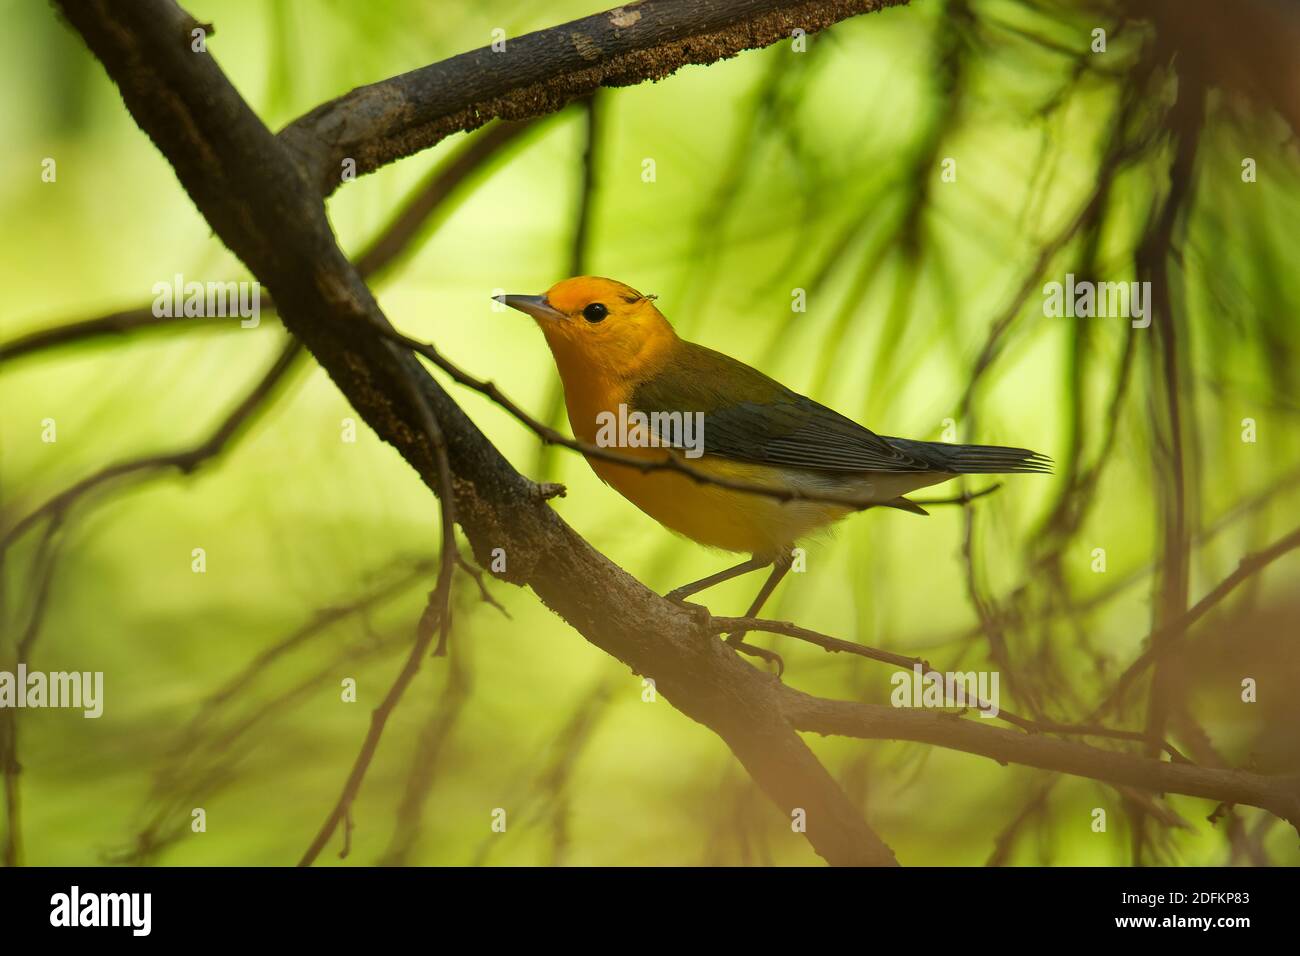 Prothonotary warbler - Protonotaria citrea small yellow songbird of the New World warbler family, the only member of the genus Protonotaria, bird on t Stock Photo